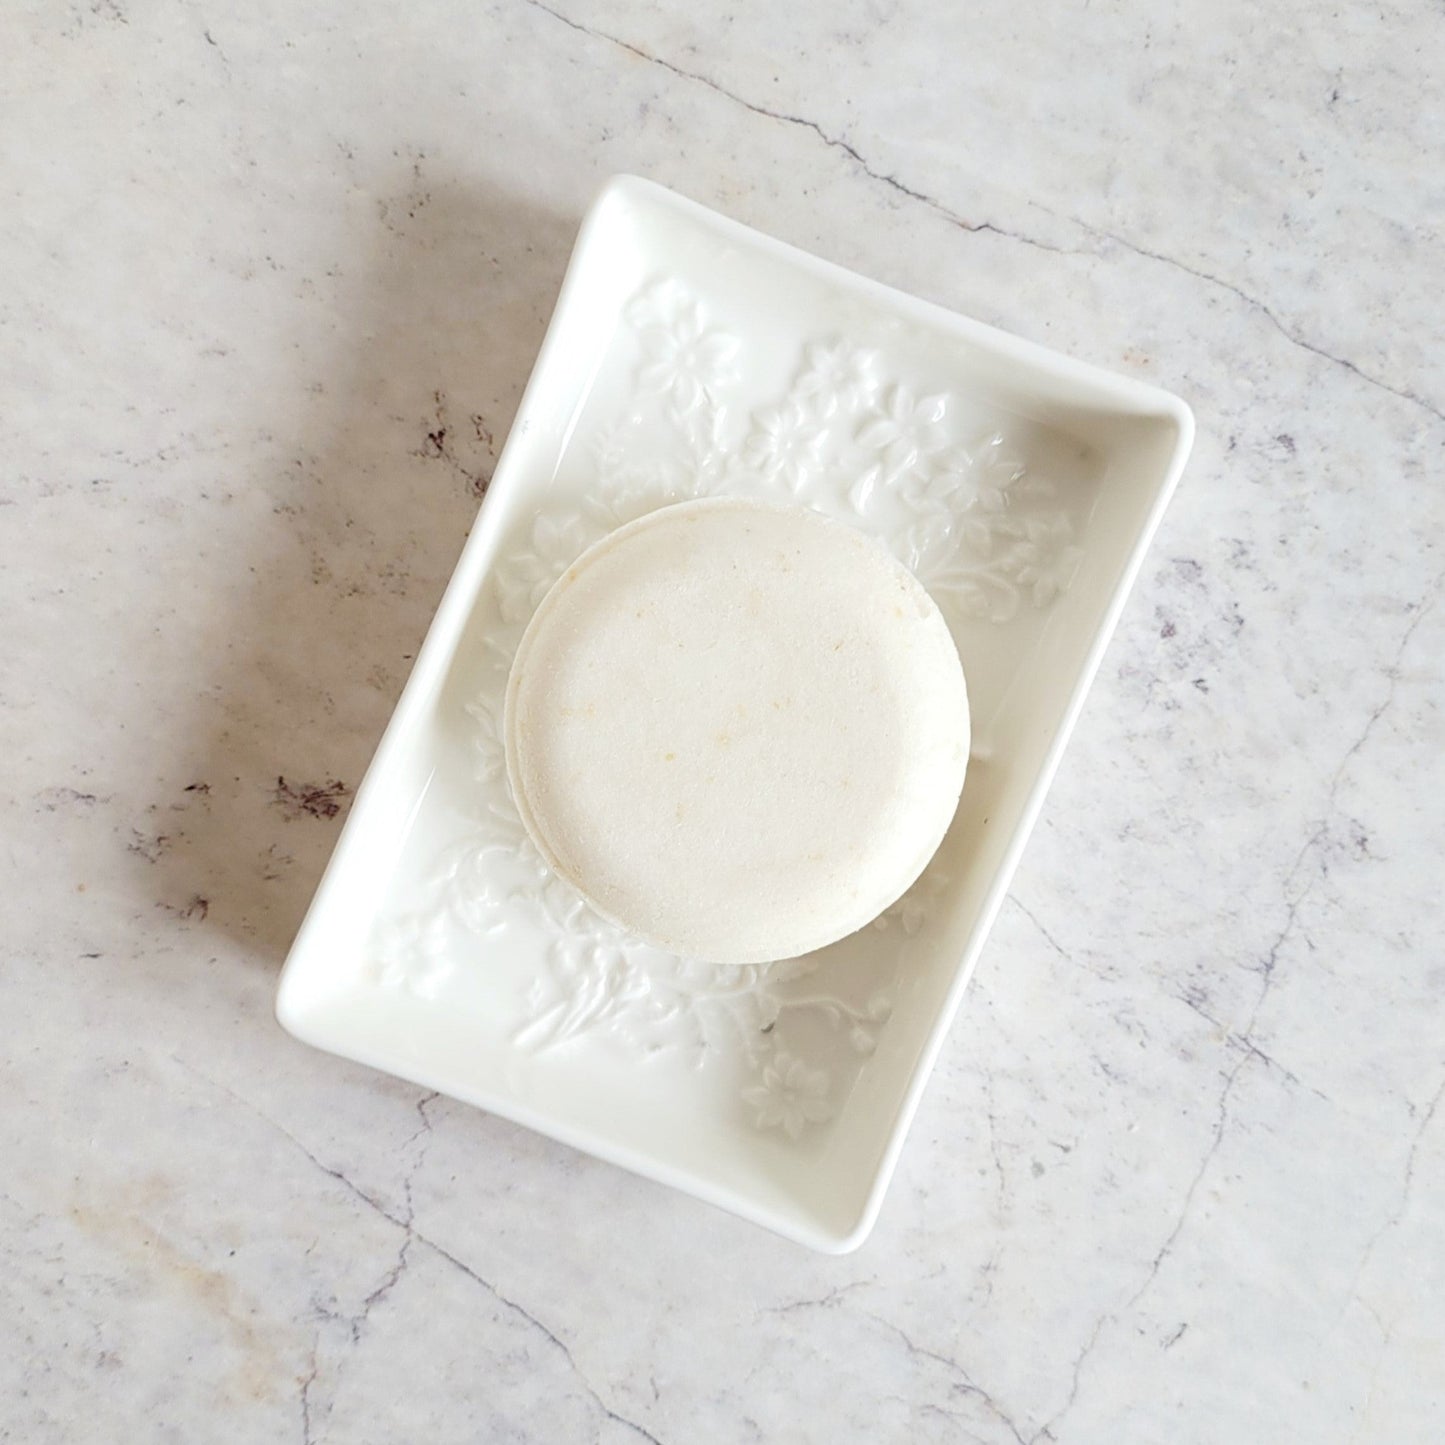 Solid Shampoo Bar, round, white disk with specs of ground oatmeal. Shampoo bar is in a white ceramic soap dish,